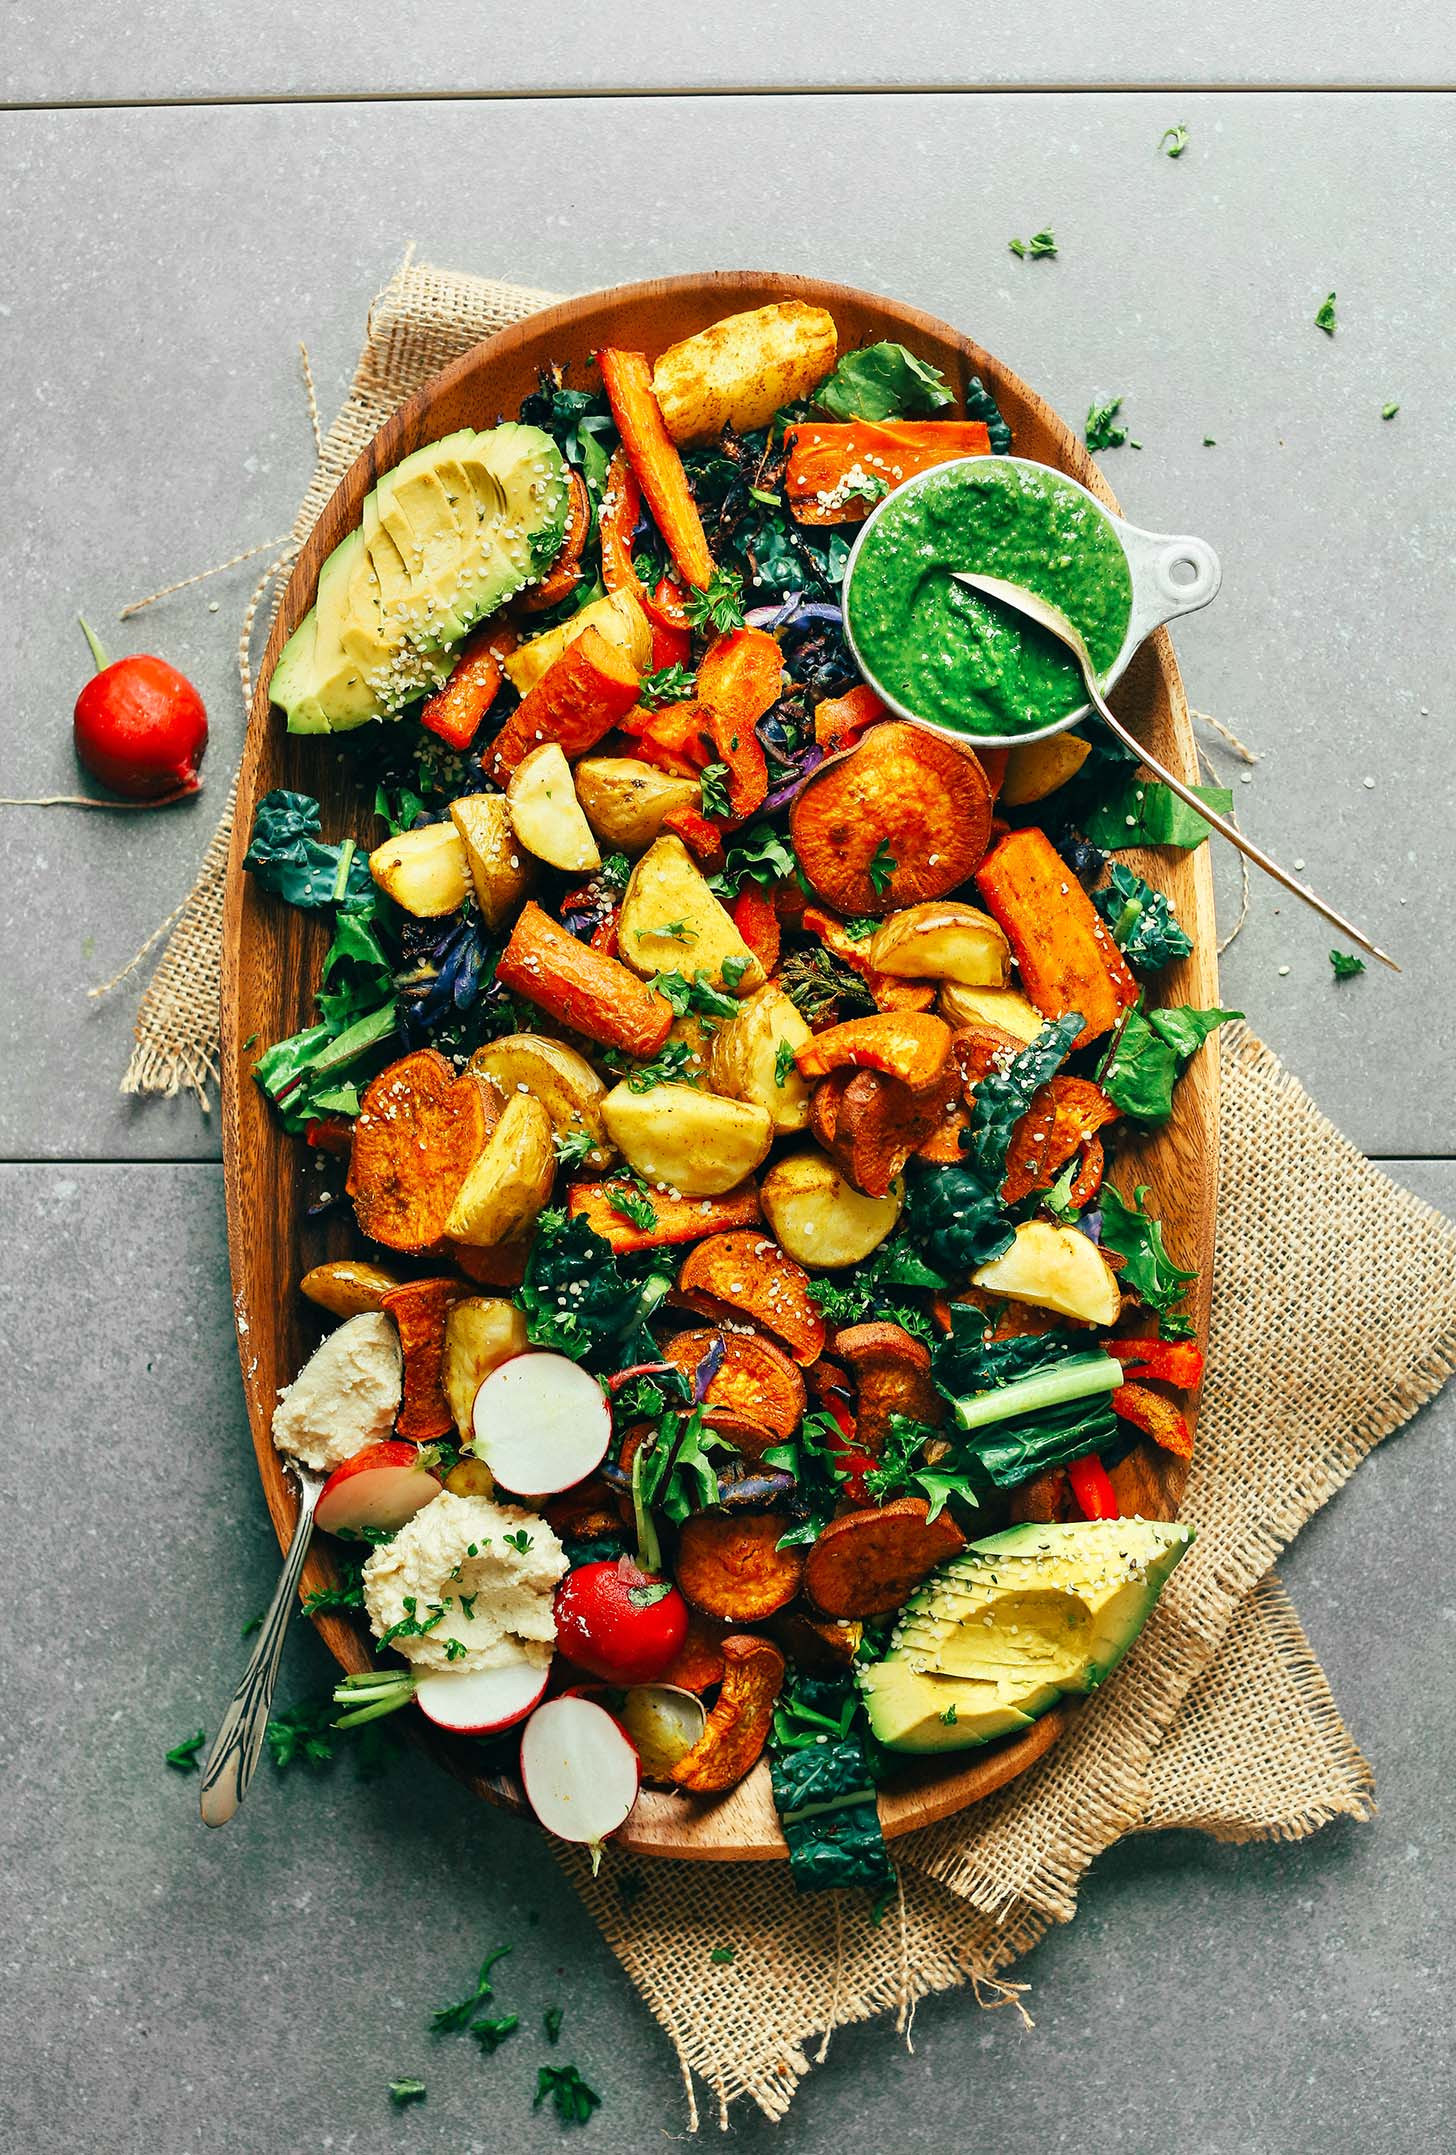 Yummy Vegetarian Recipes
 Roasted Ve able Salad with Chimichurri